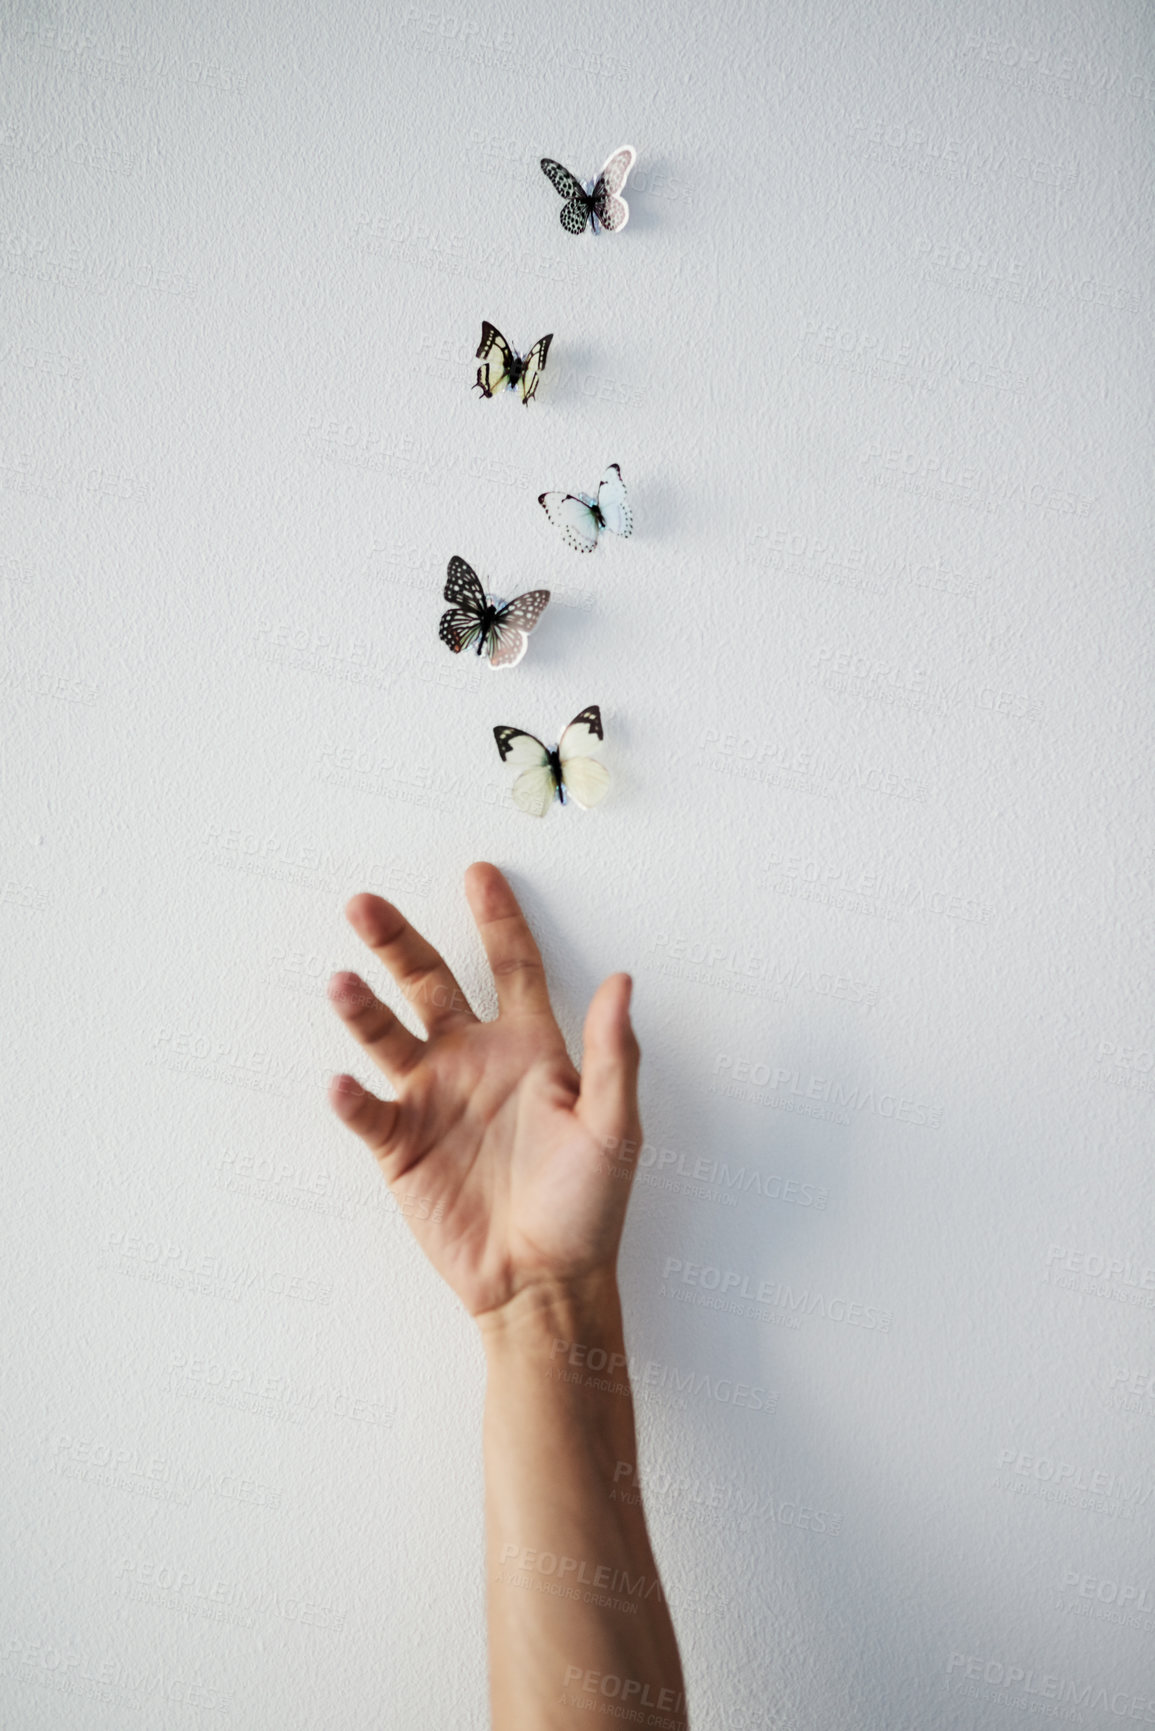 Buy stock photo Studio shot of a unrecognizable persons hand releasing butterflies into the air on a grey background